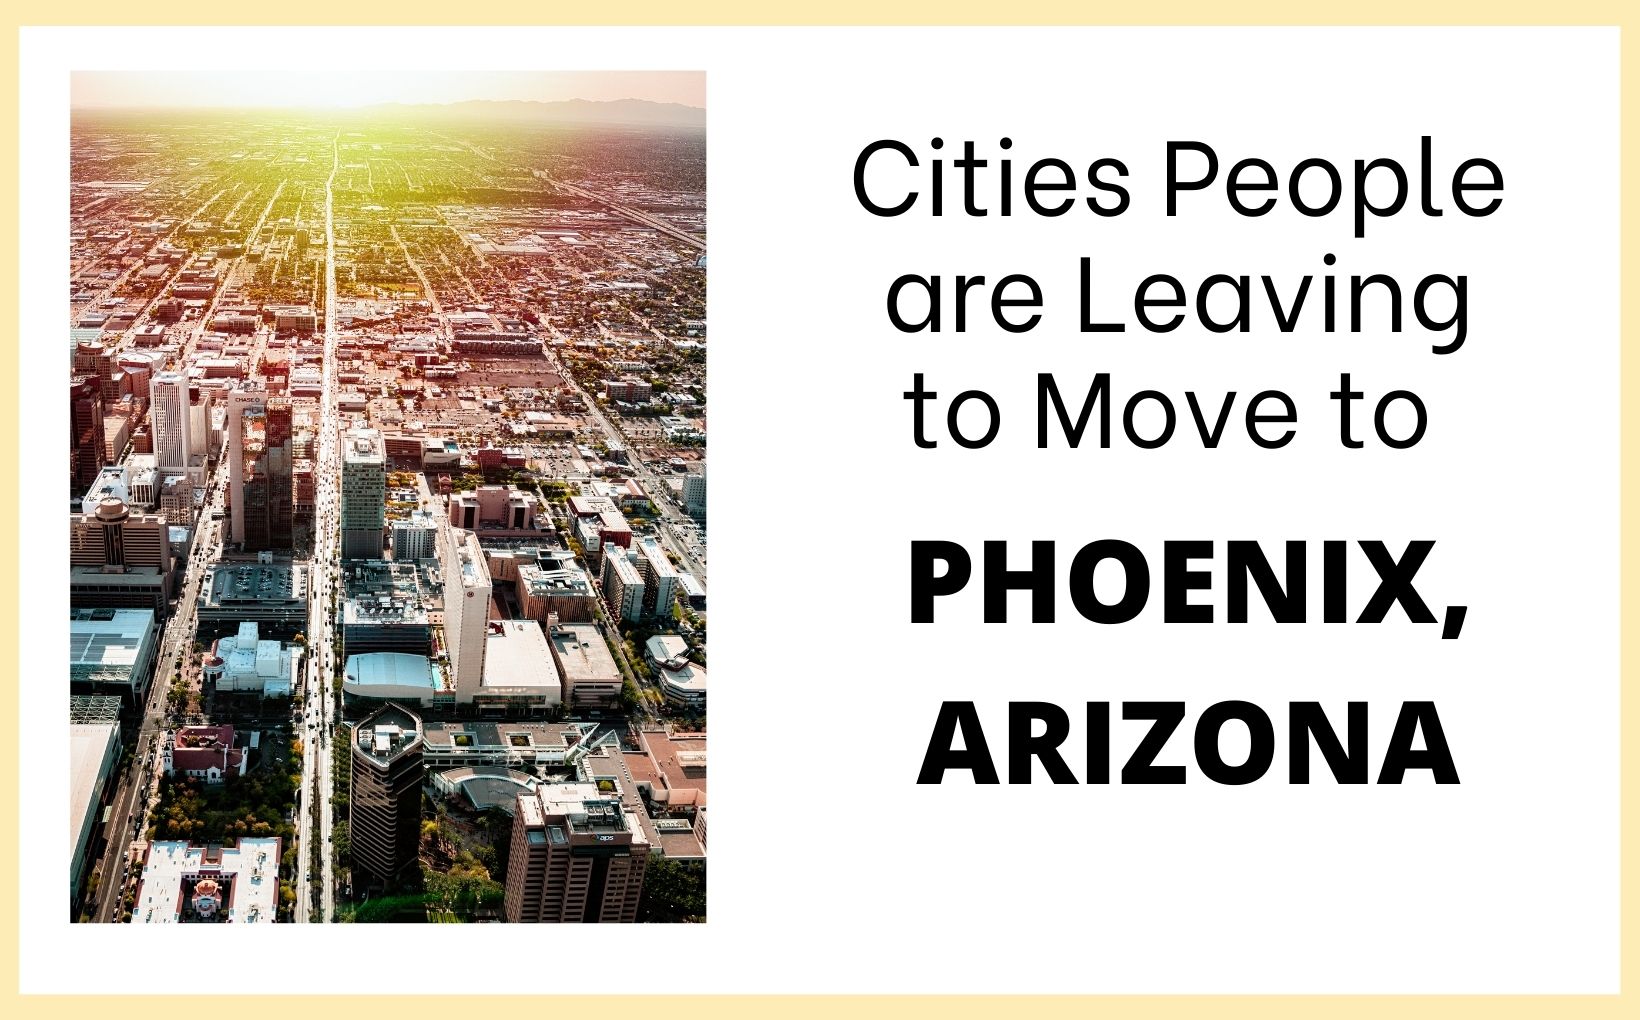 Cities people are leaving to move to Phoenix Arizona feature image